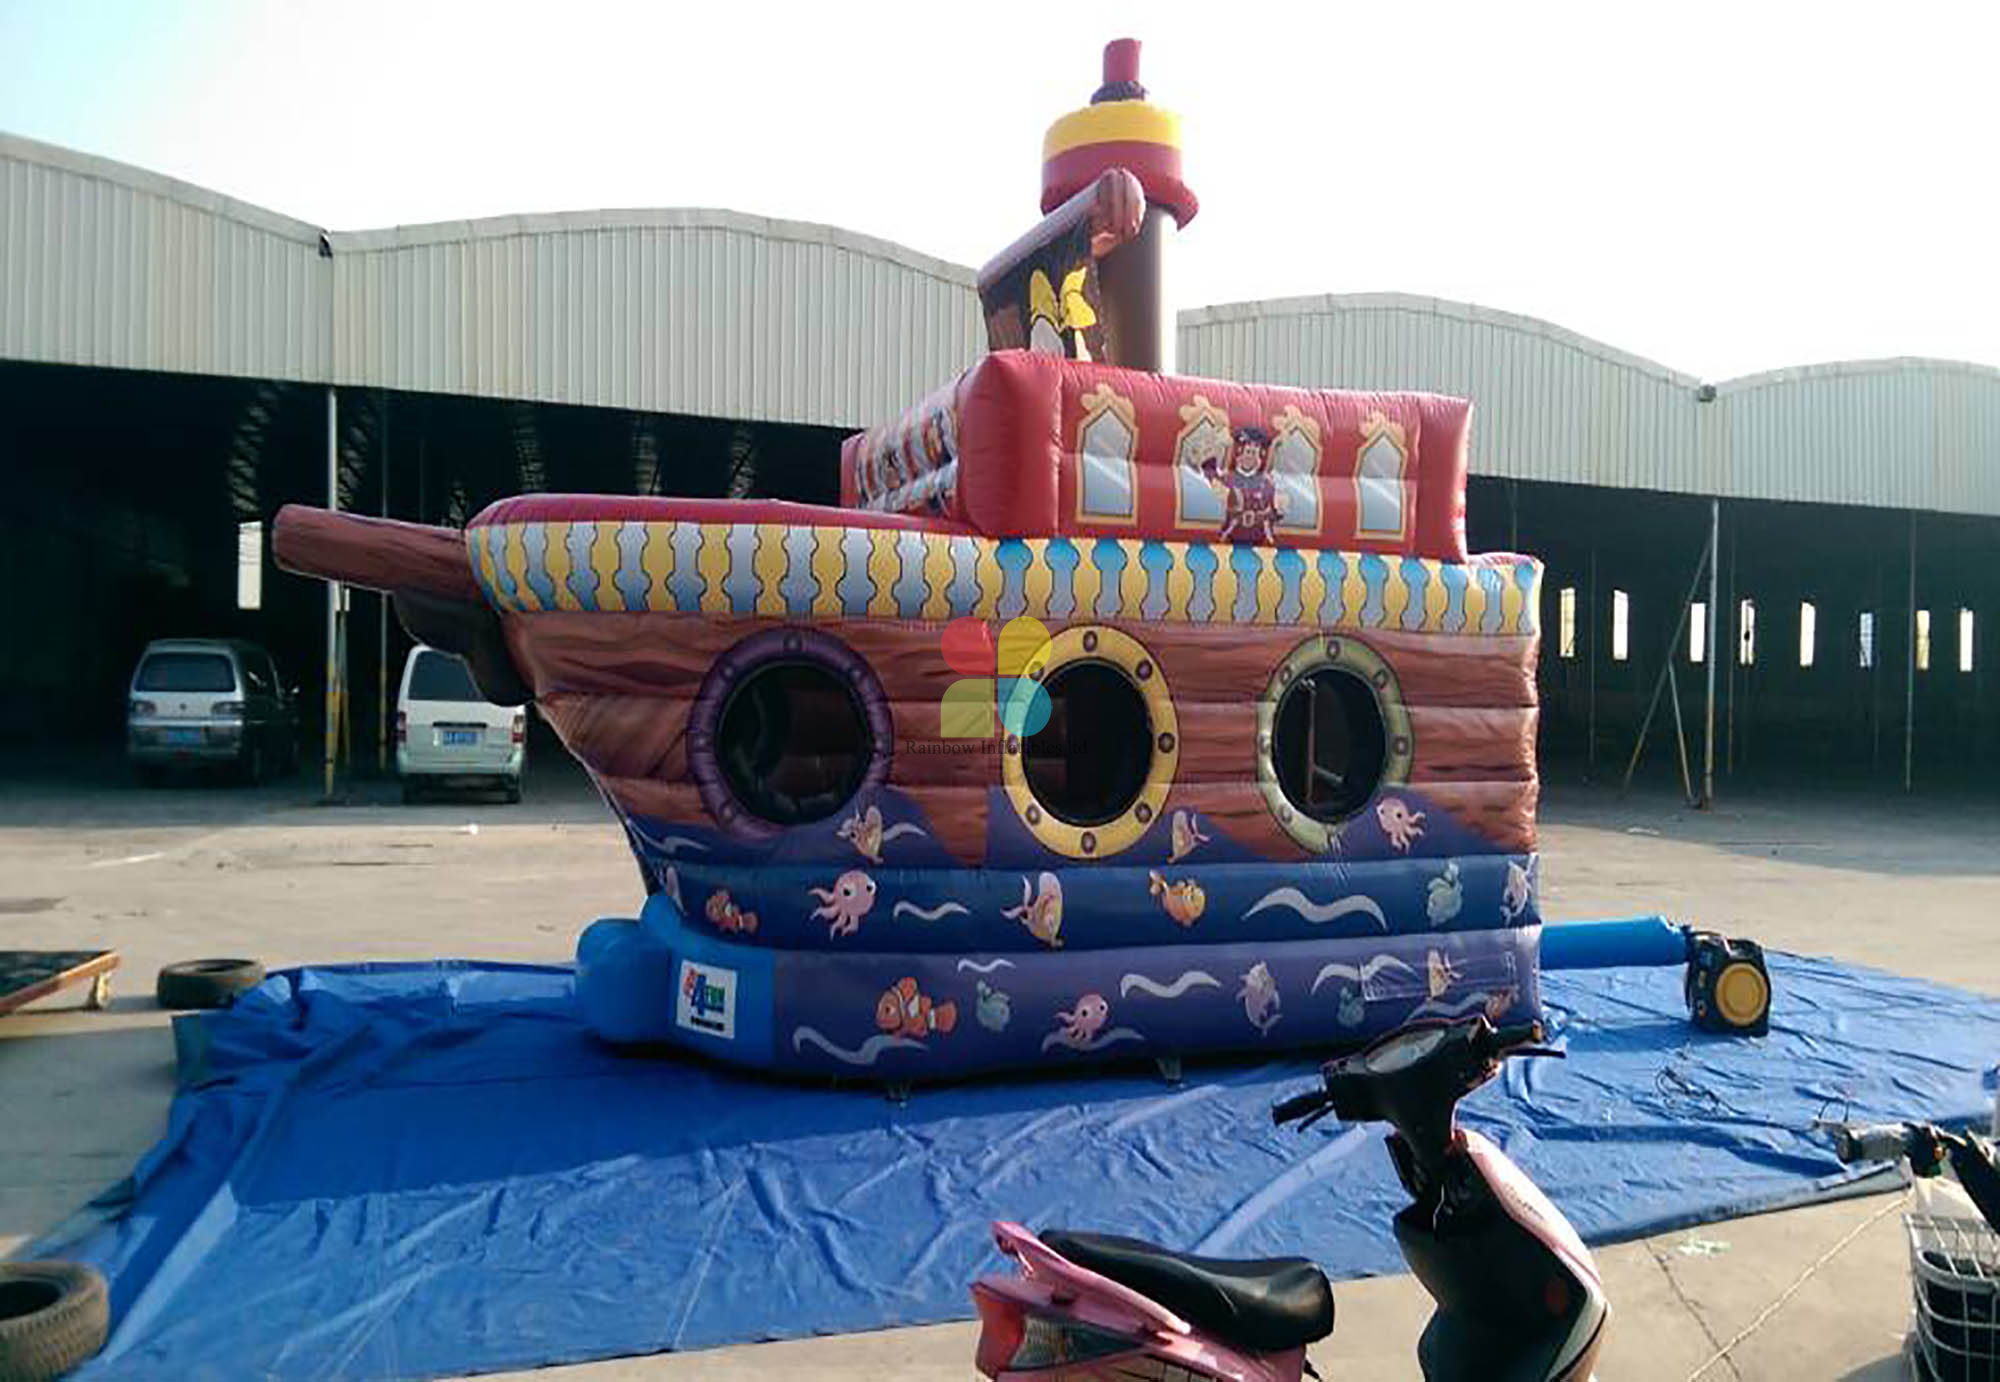 Inflatable New Arrival Pirate Boat for sale 